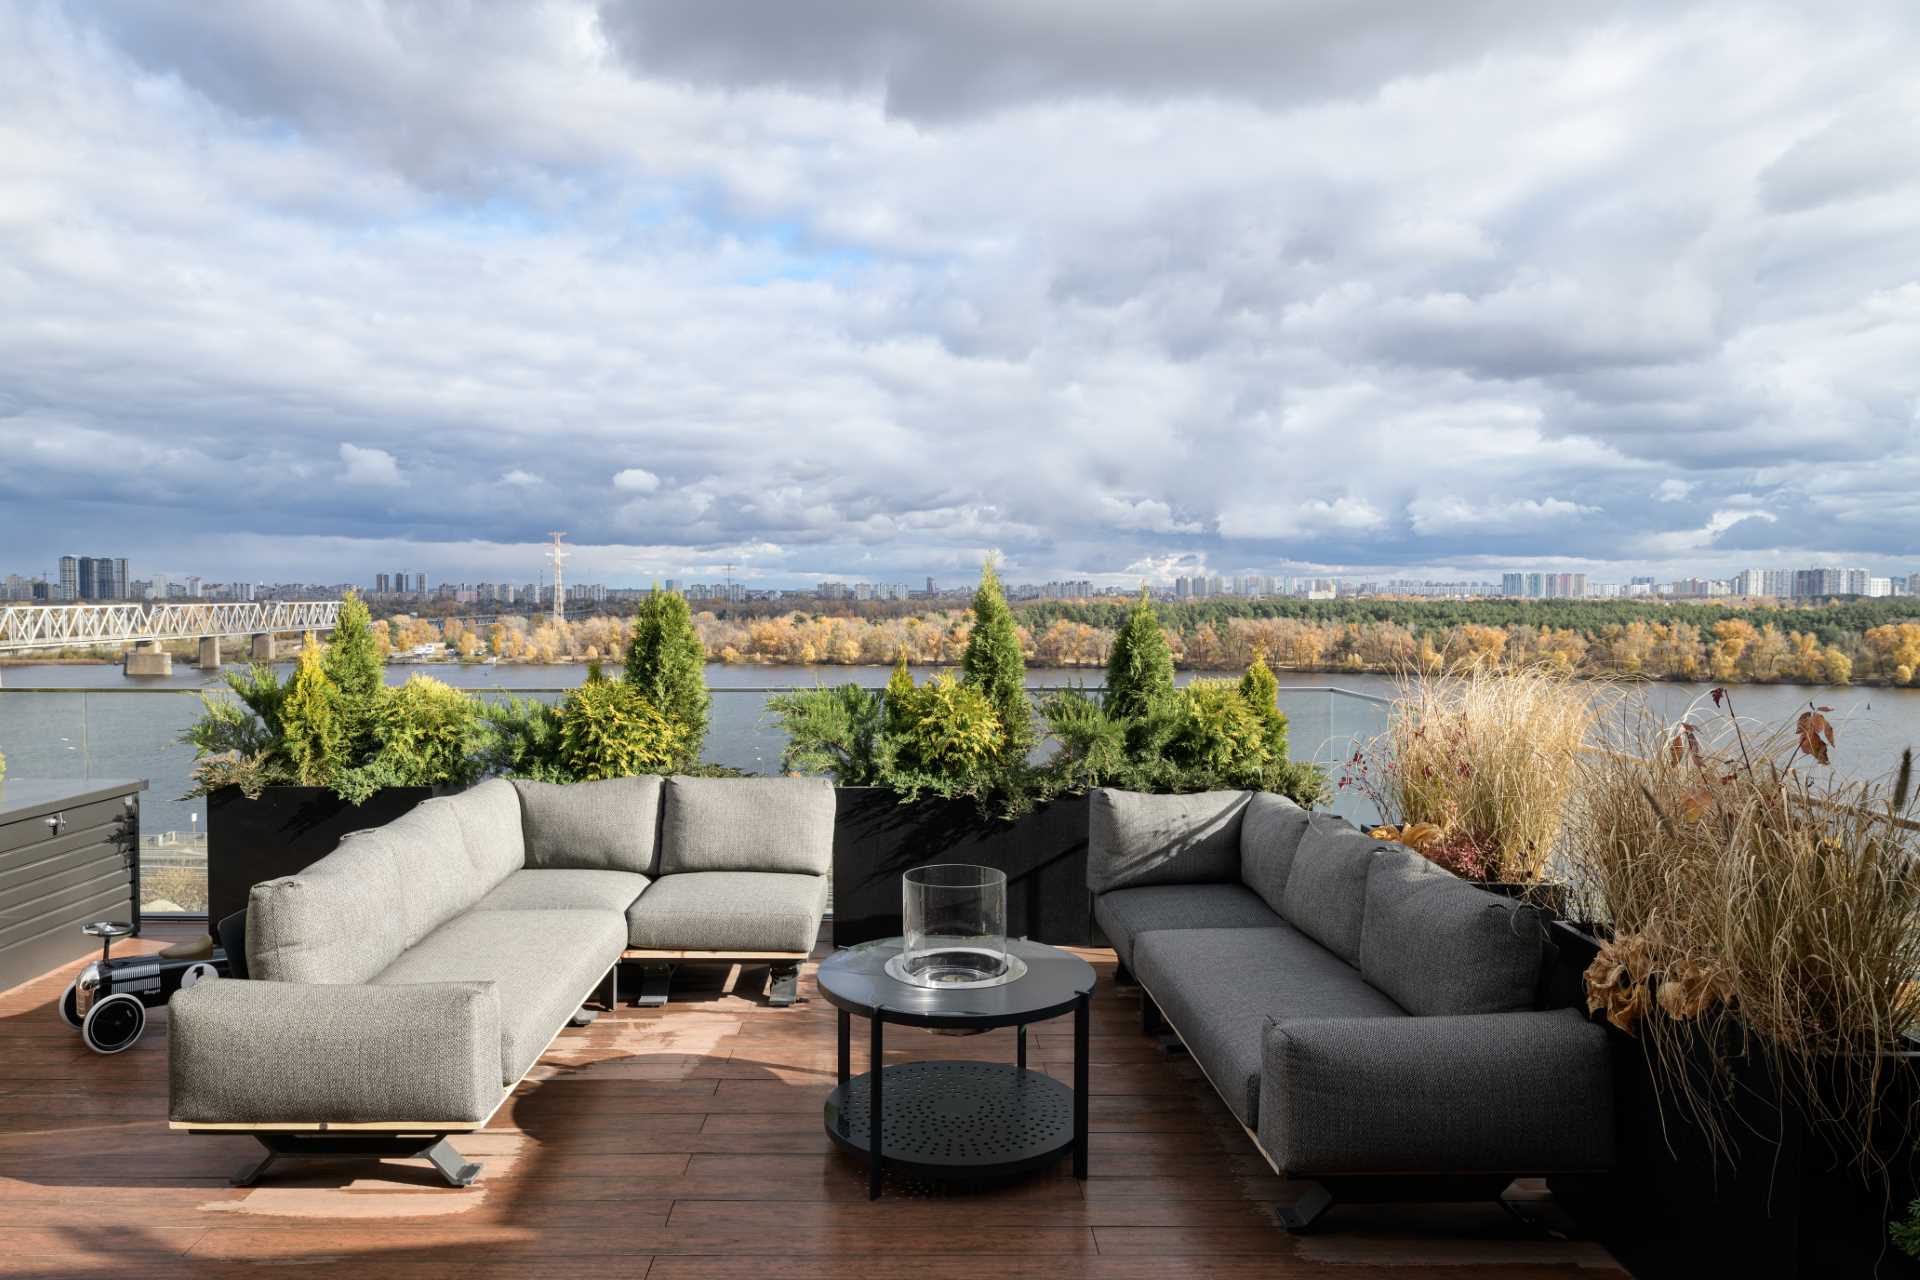 A rooftop terrace with lounge seating.